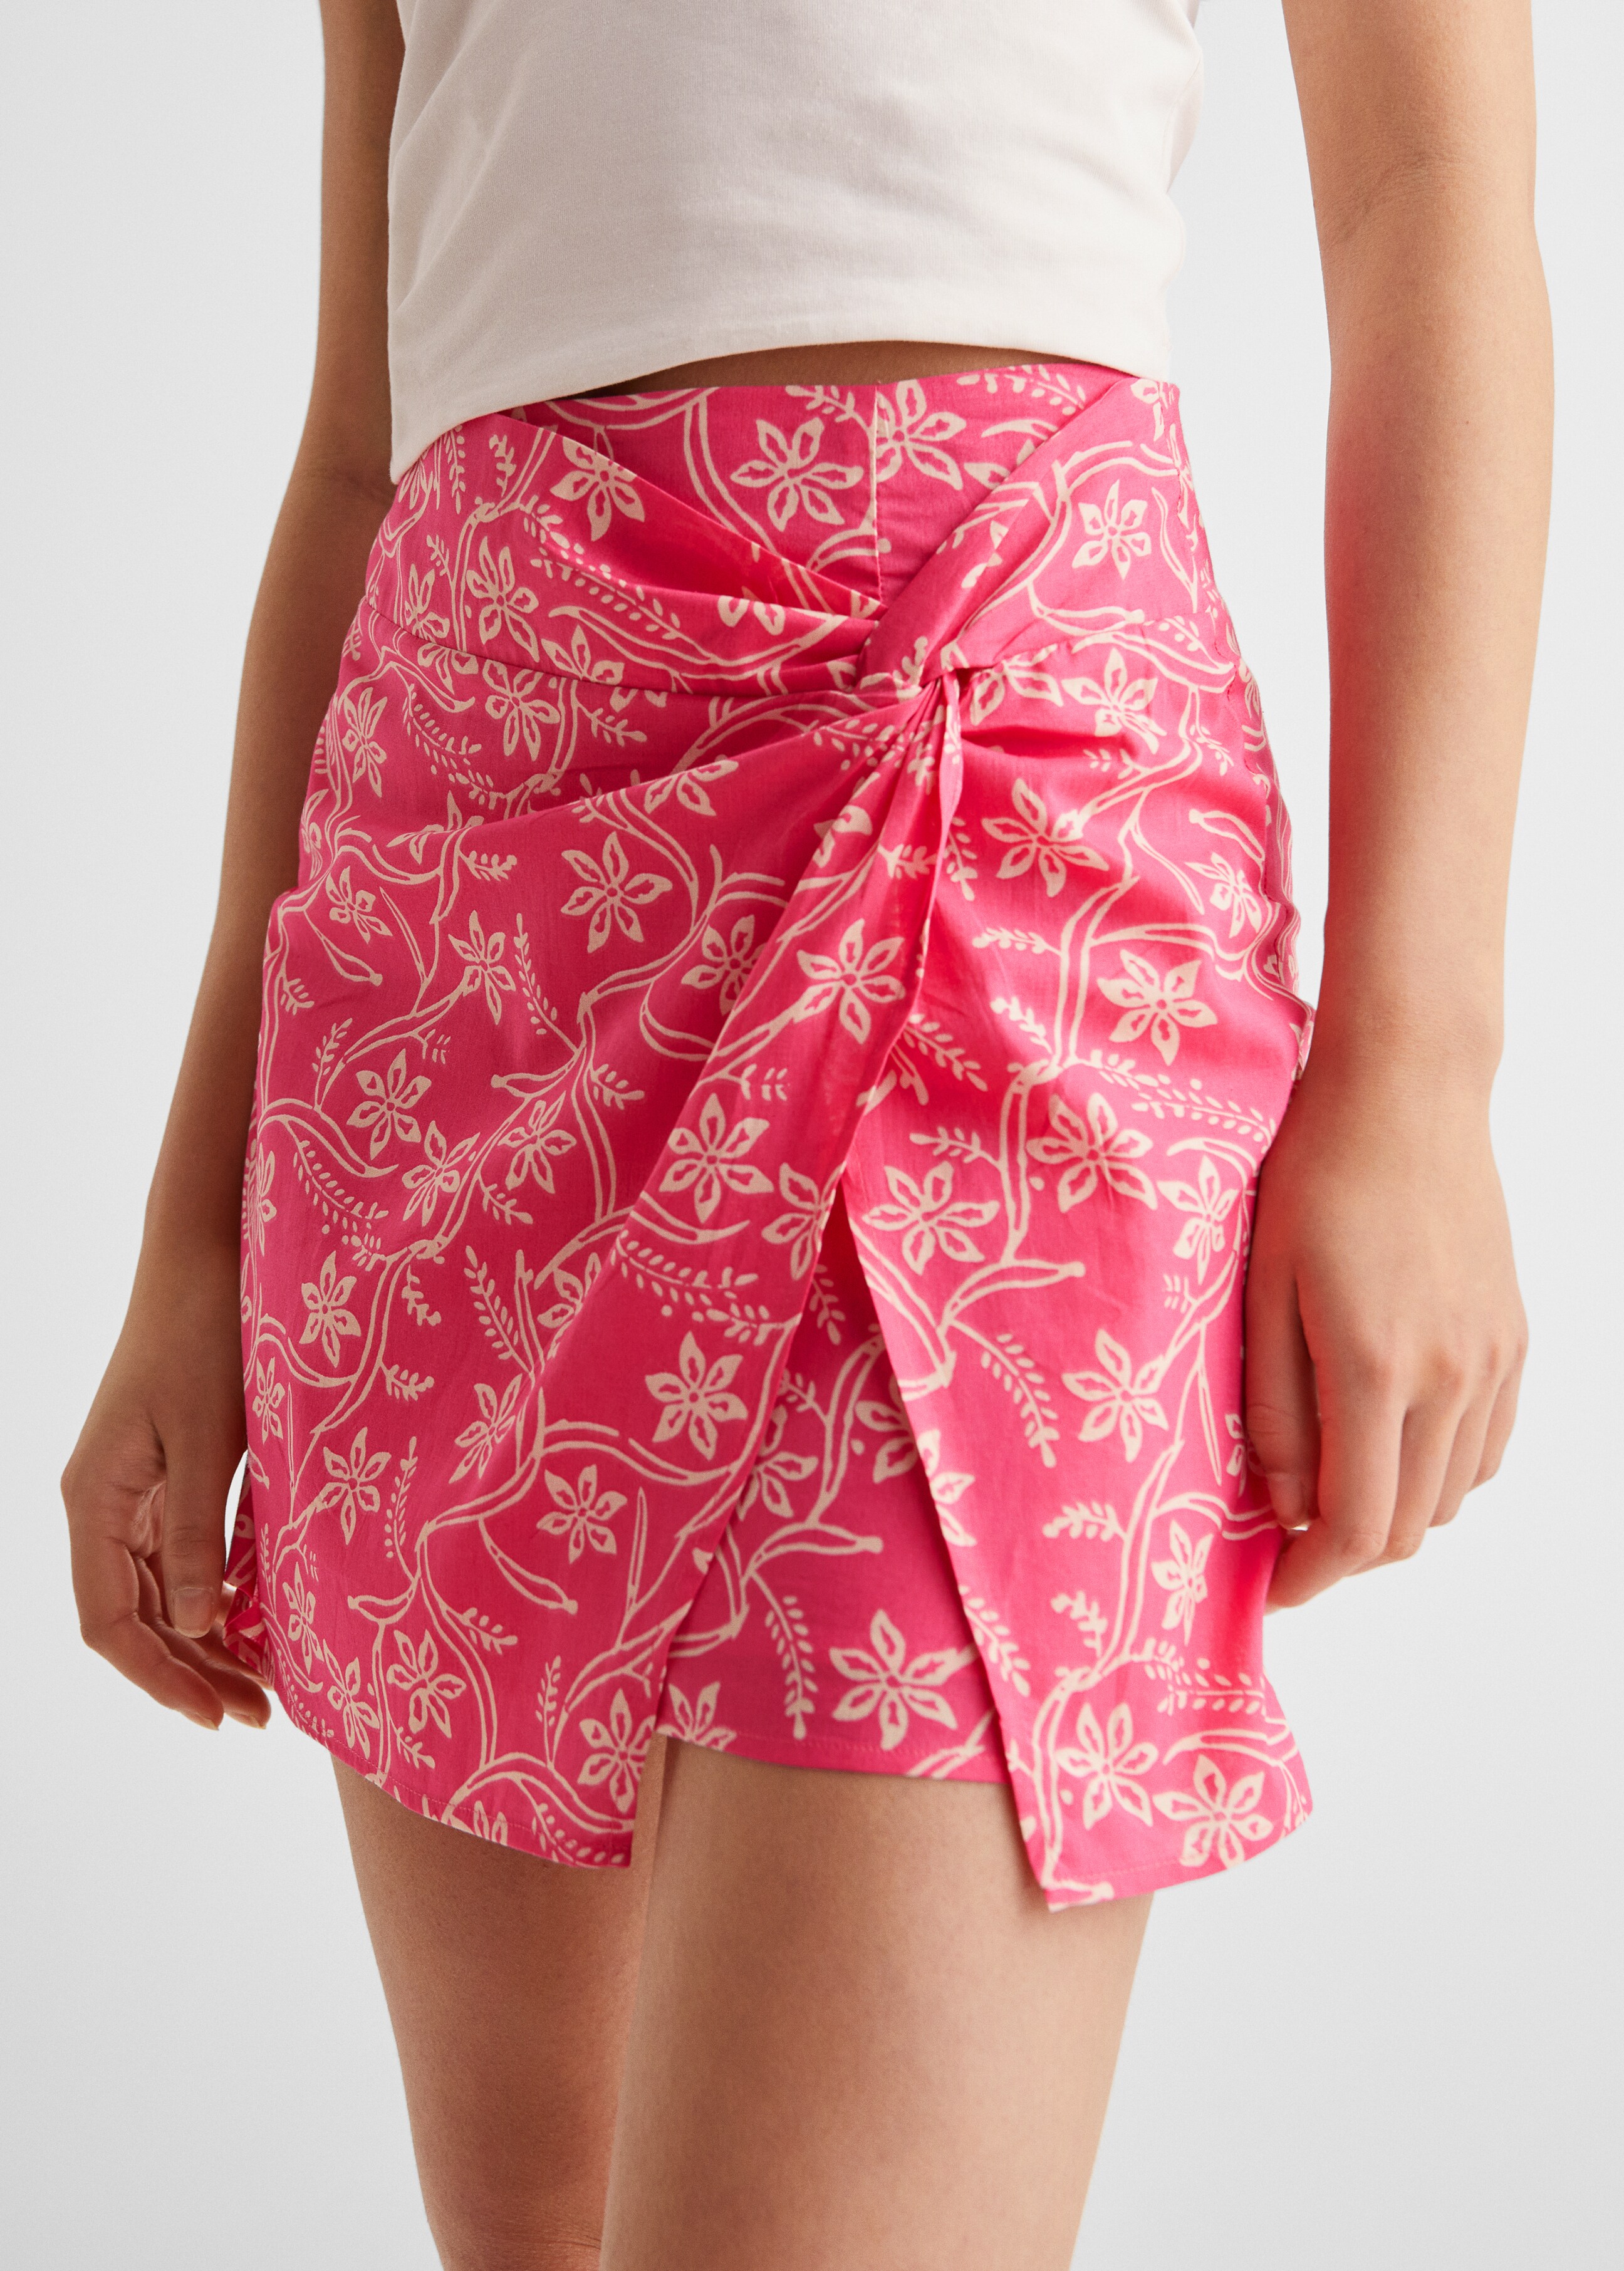 Knot printed skirt - Details of the article 6